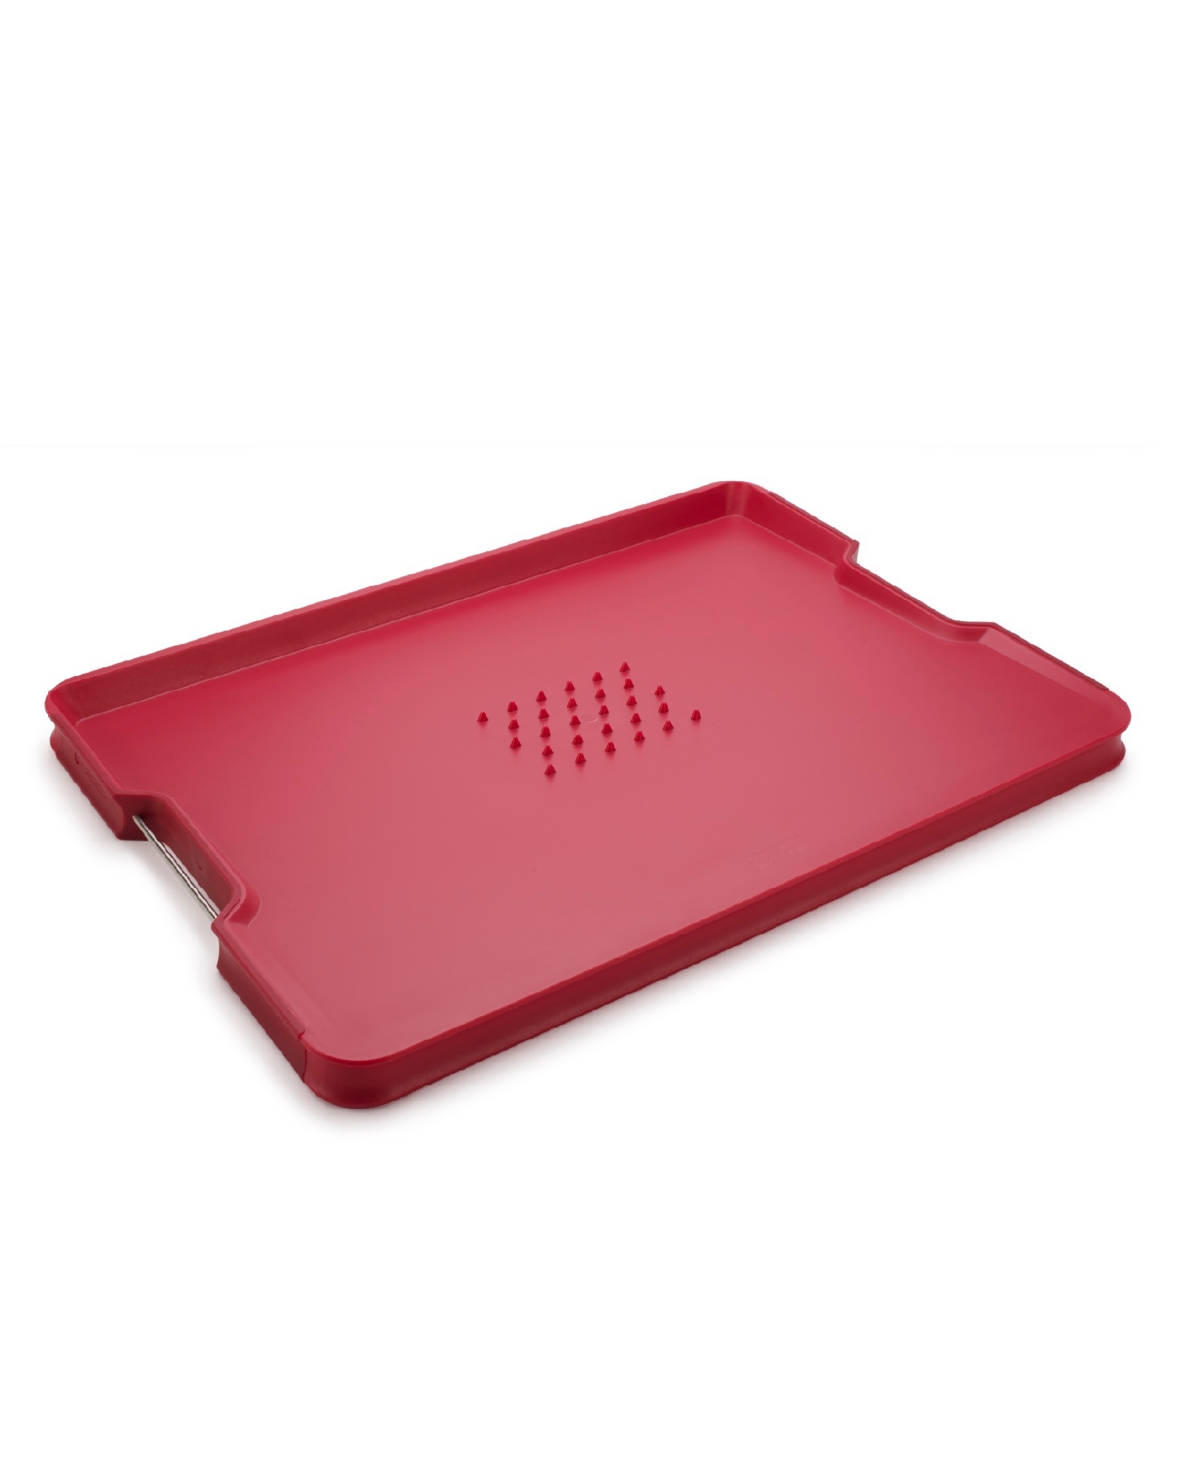 Joseph Joseph Cut And Carve Plus Multi-function Chopping Board In Red